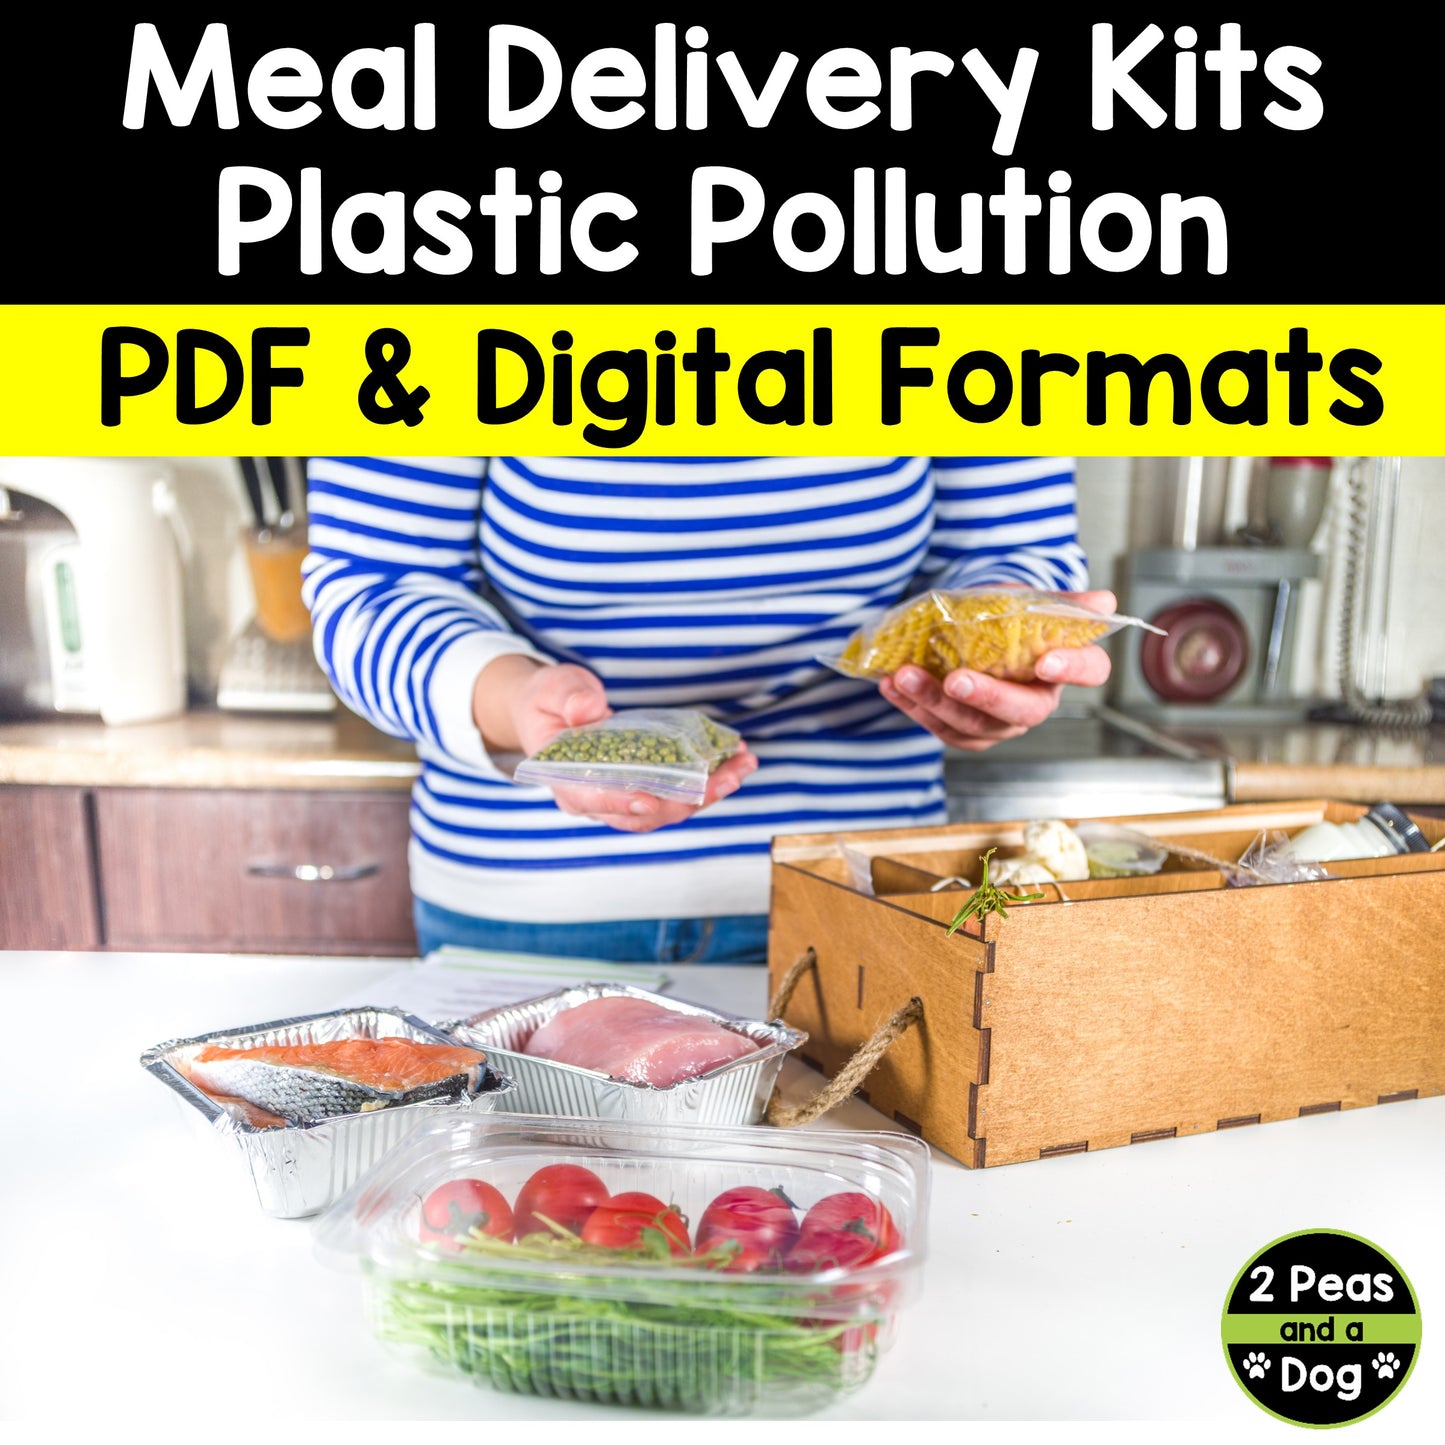 Media Literacy: Consumer Awareness Lesson - Meal Delivery Kits